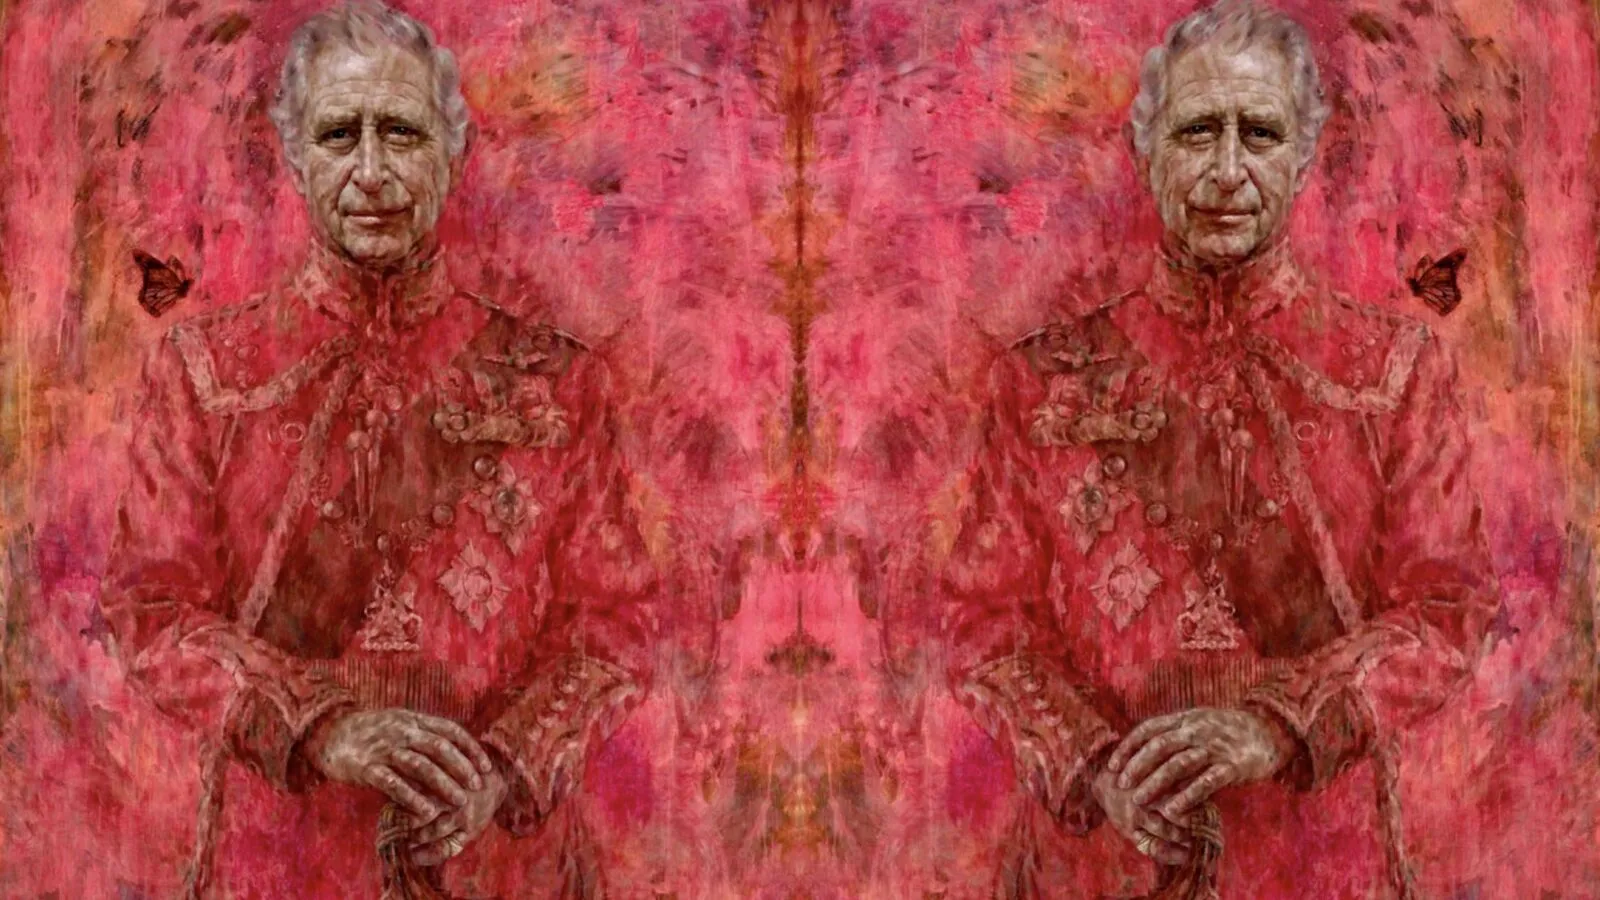 ‘Baphomet’ Face Revealed in Mirrored Image of King Charles’ Satanic Royal Portrait